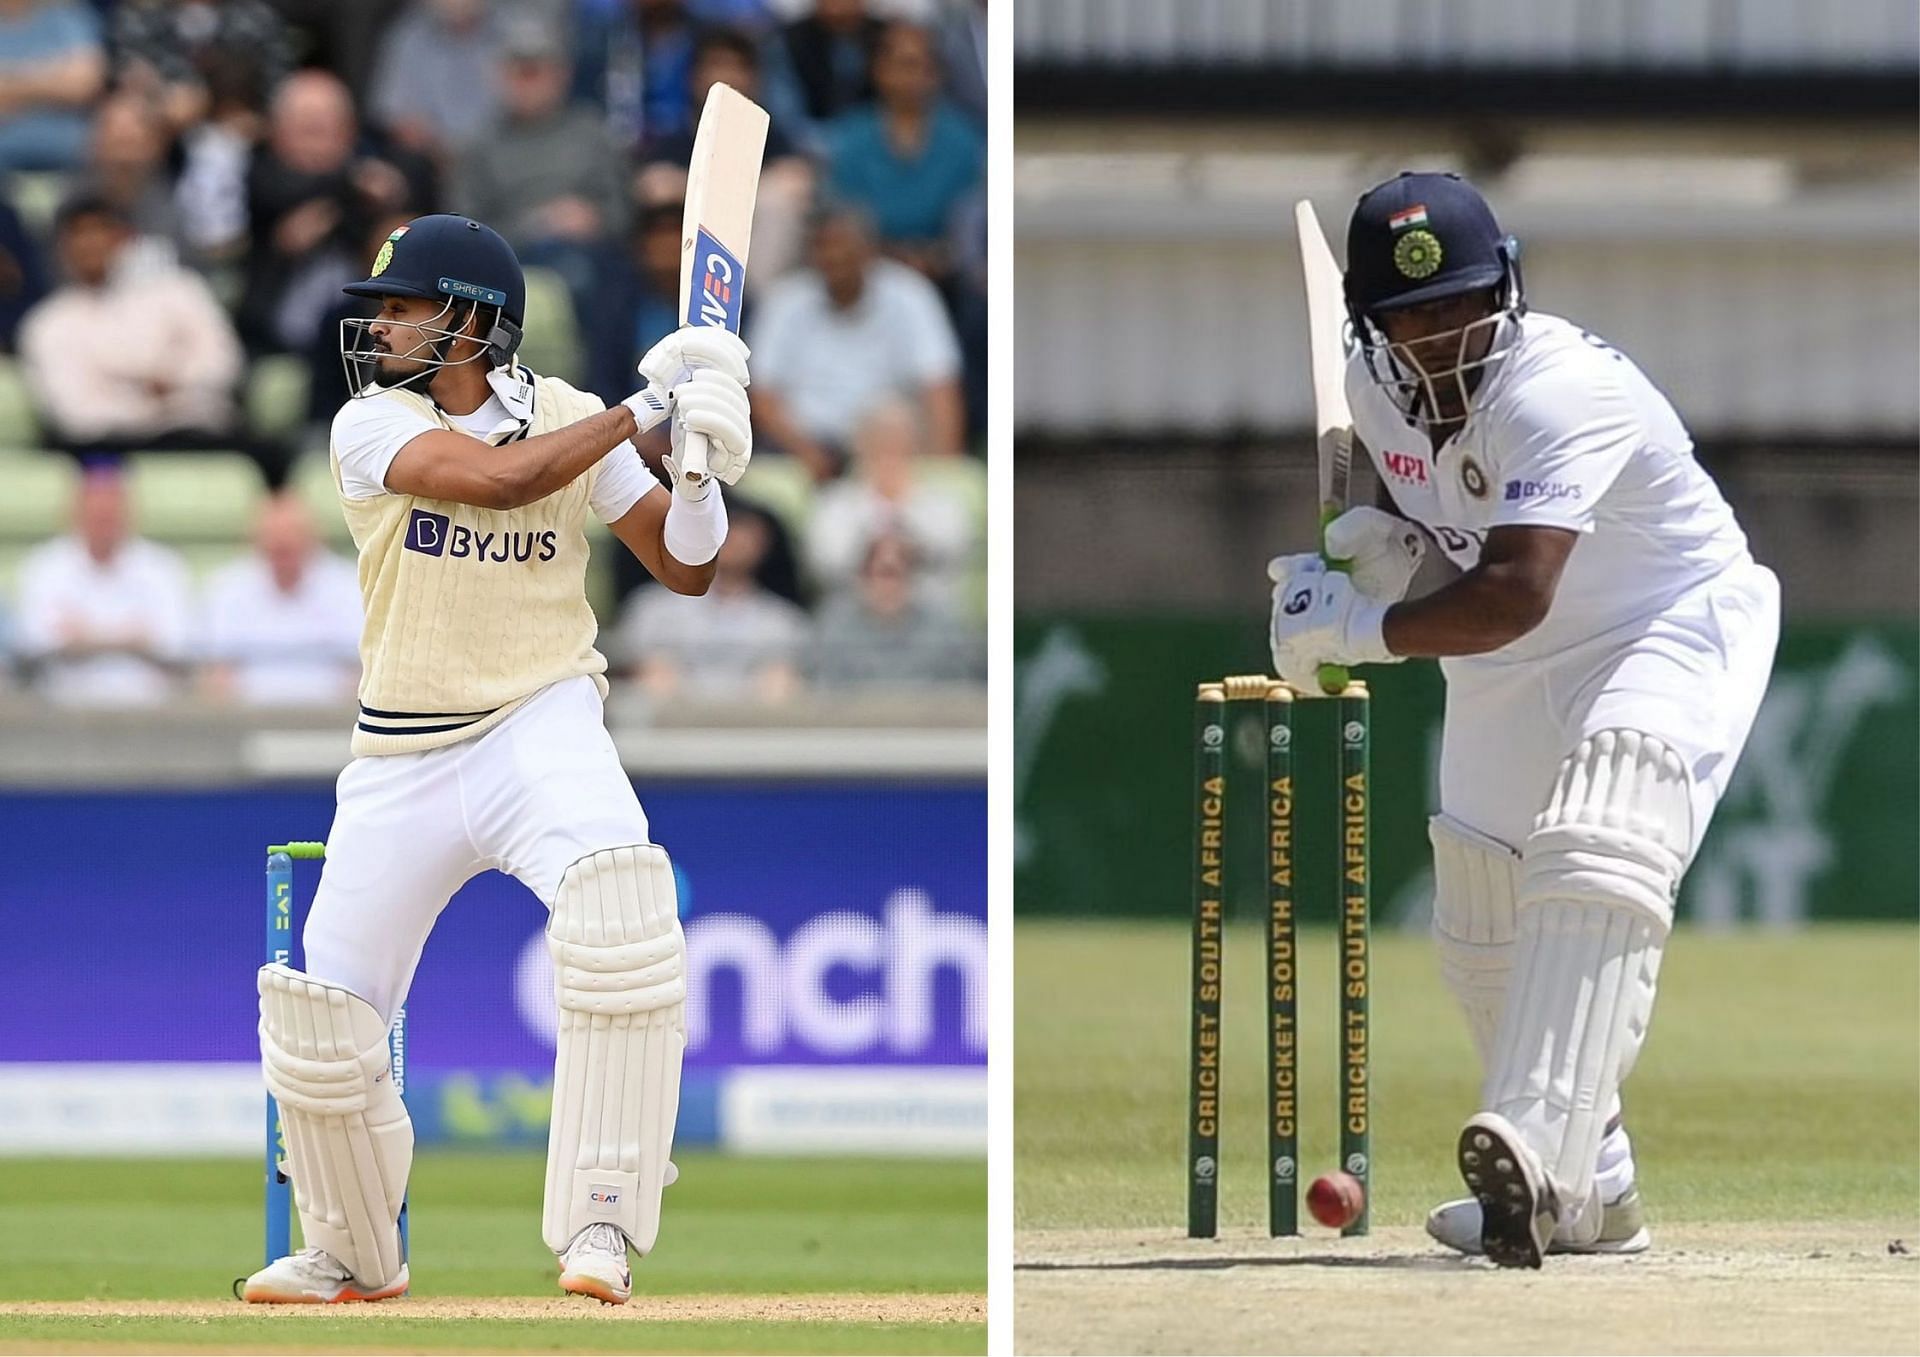 With Shreyas Iyer ruled out of the 1st Test against Australia, will Sarfaraz Khan finally get that elusive Test callup?